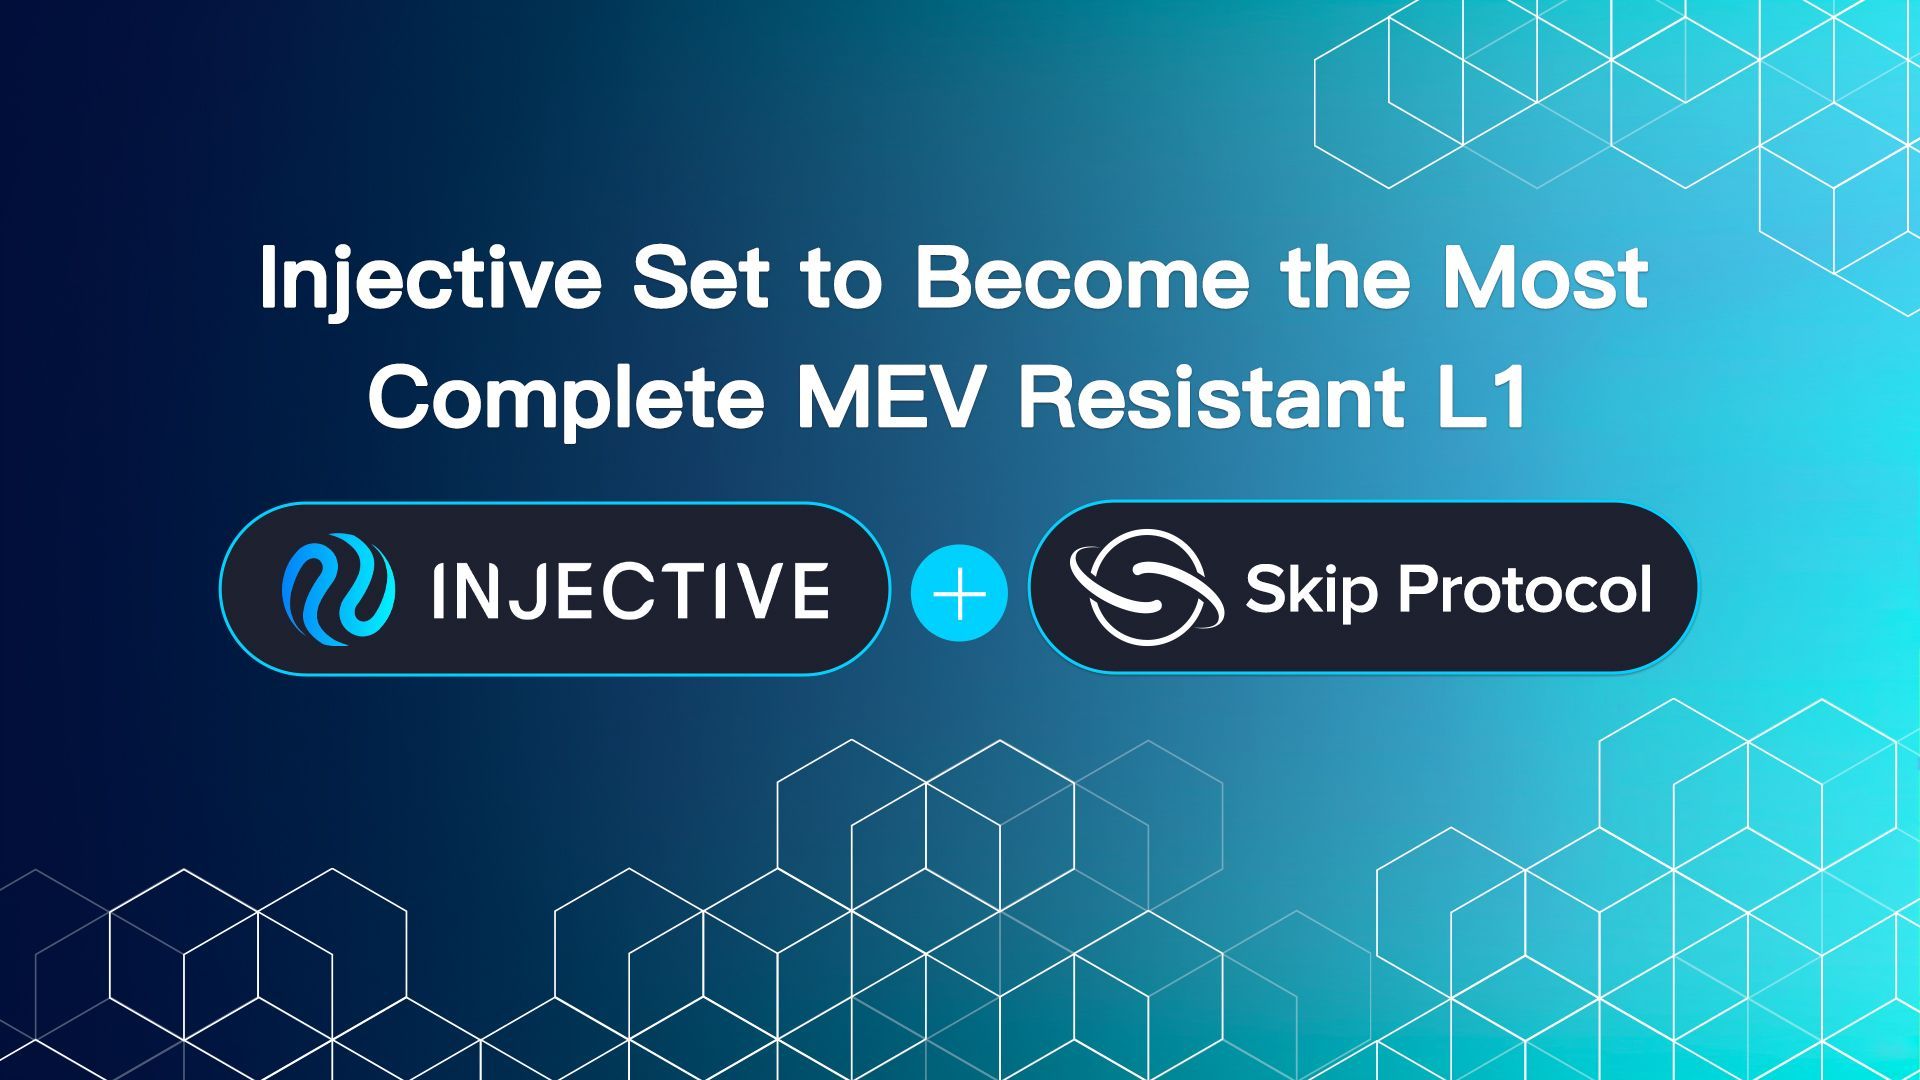 Skip is Integrating Injective to Create the Most MEV Resistant L1